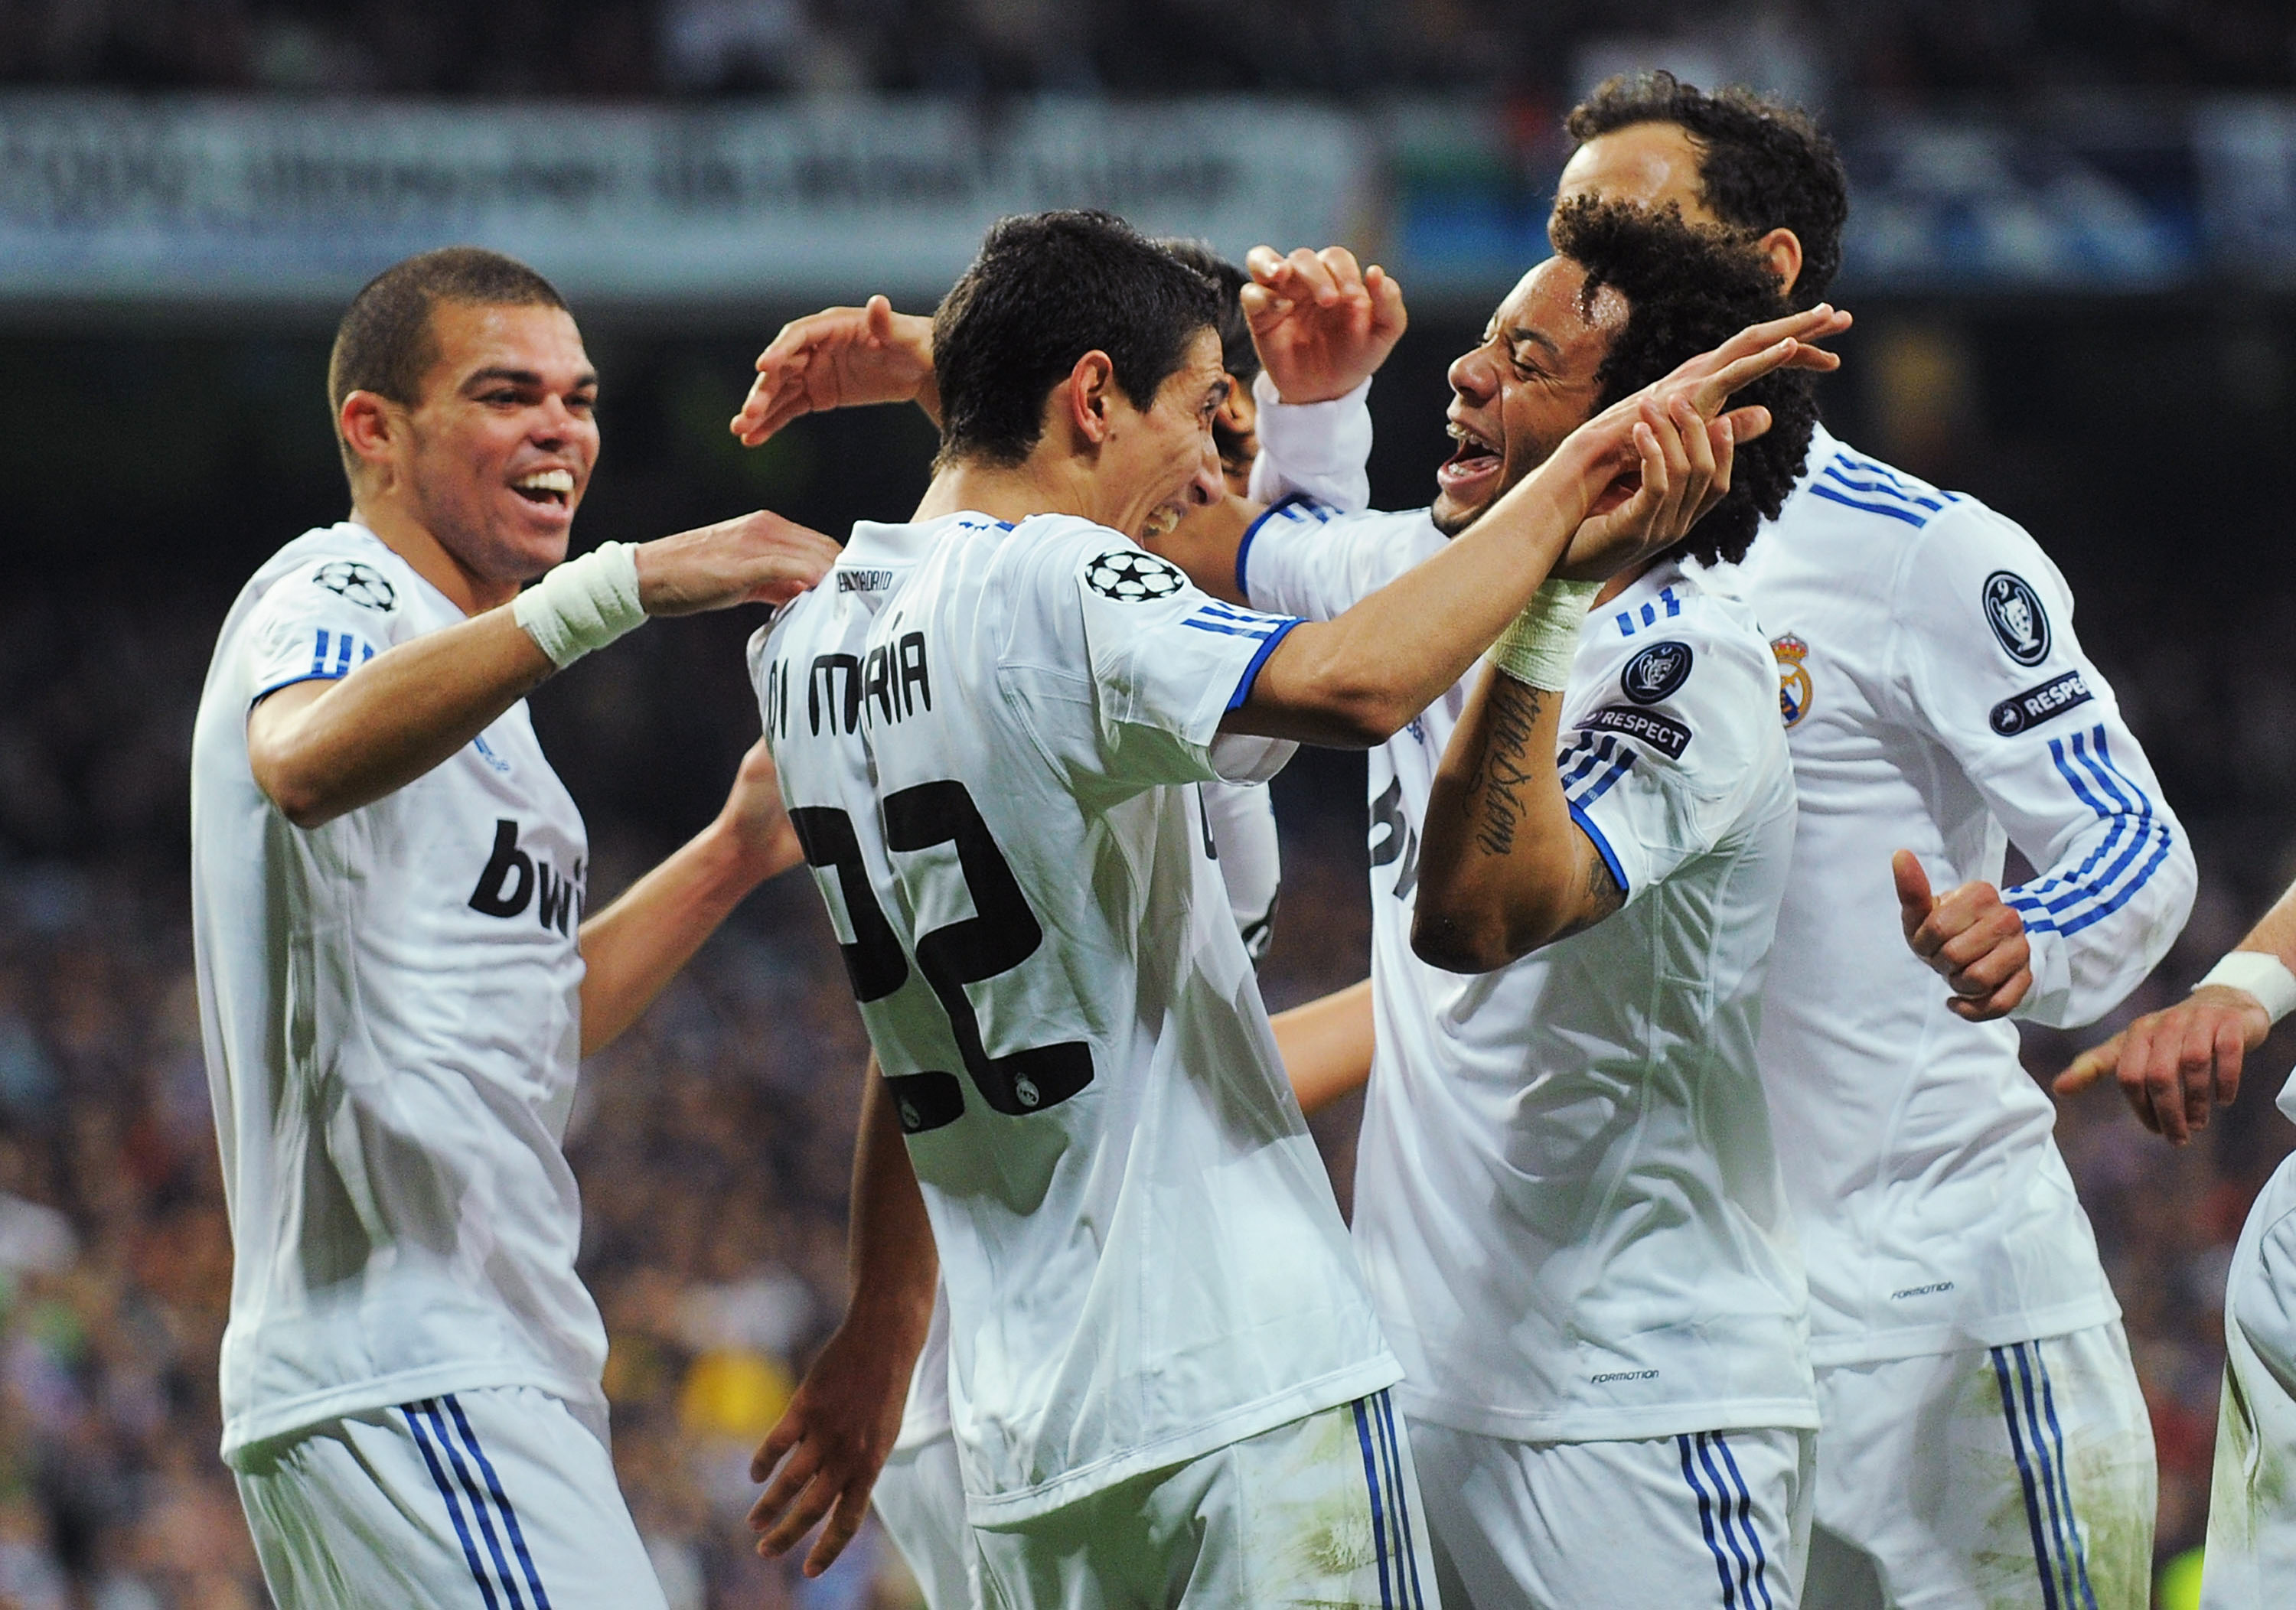 MADRID, SPAIN - MARCH 16:  Angel Di Maria (L) of Real Madrid celebrates with Marcelo after scoring Real's third goal during the UEFA Champions League round of 16 second leg match between Real Madrid and Lyon at Estadio Santiago Bernabeu on March 16, 2011